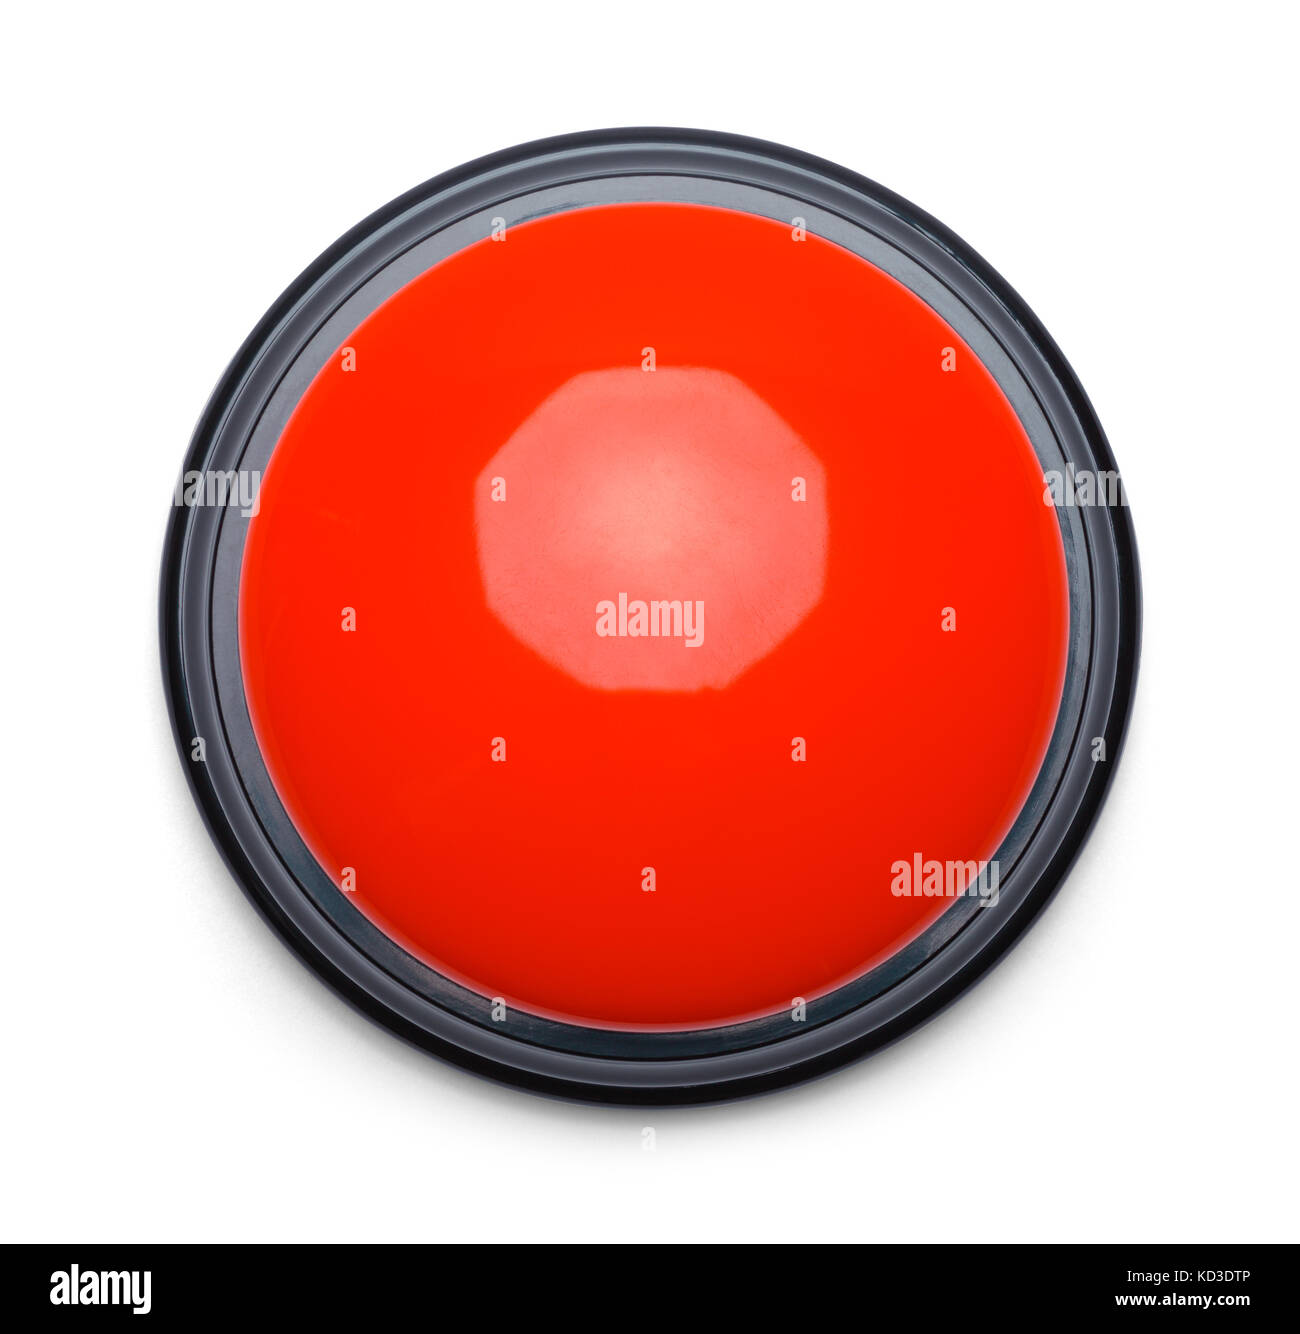 Large Red Push Button Isolated on a White Background. Stock Photo